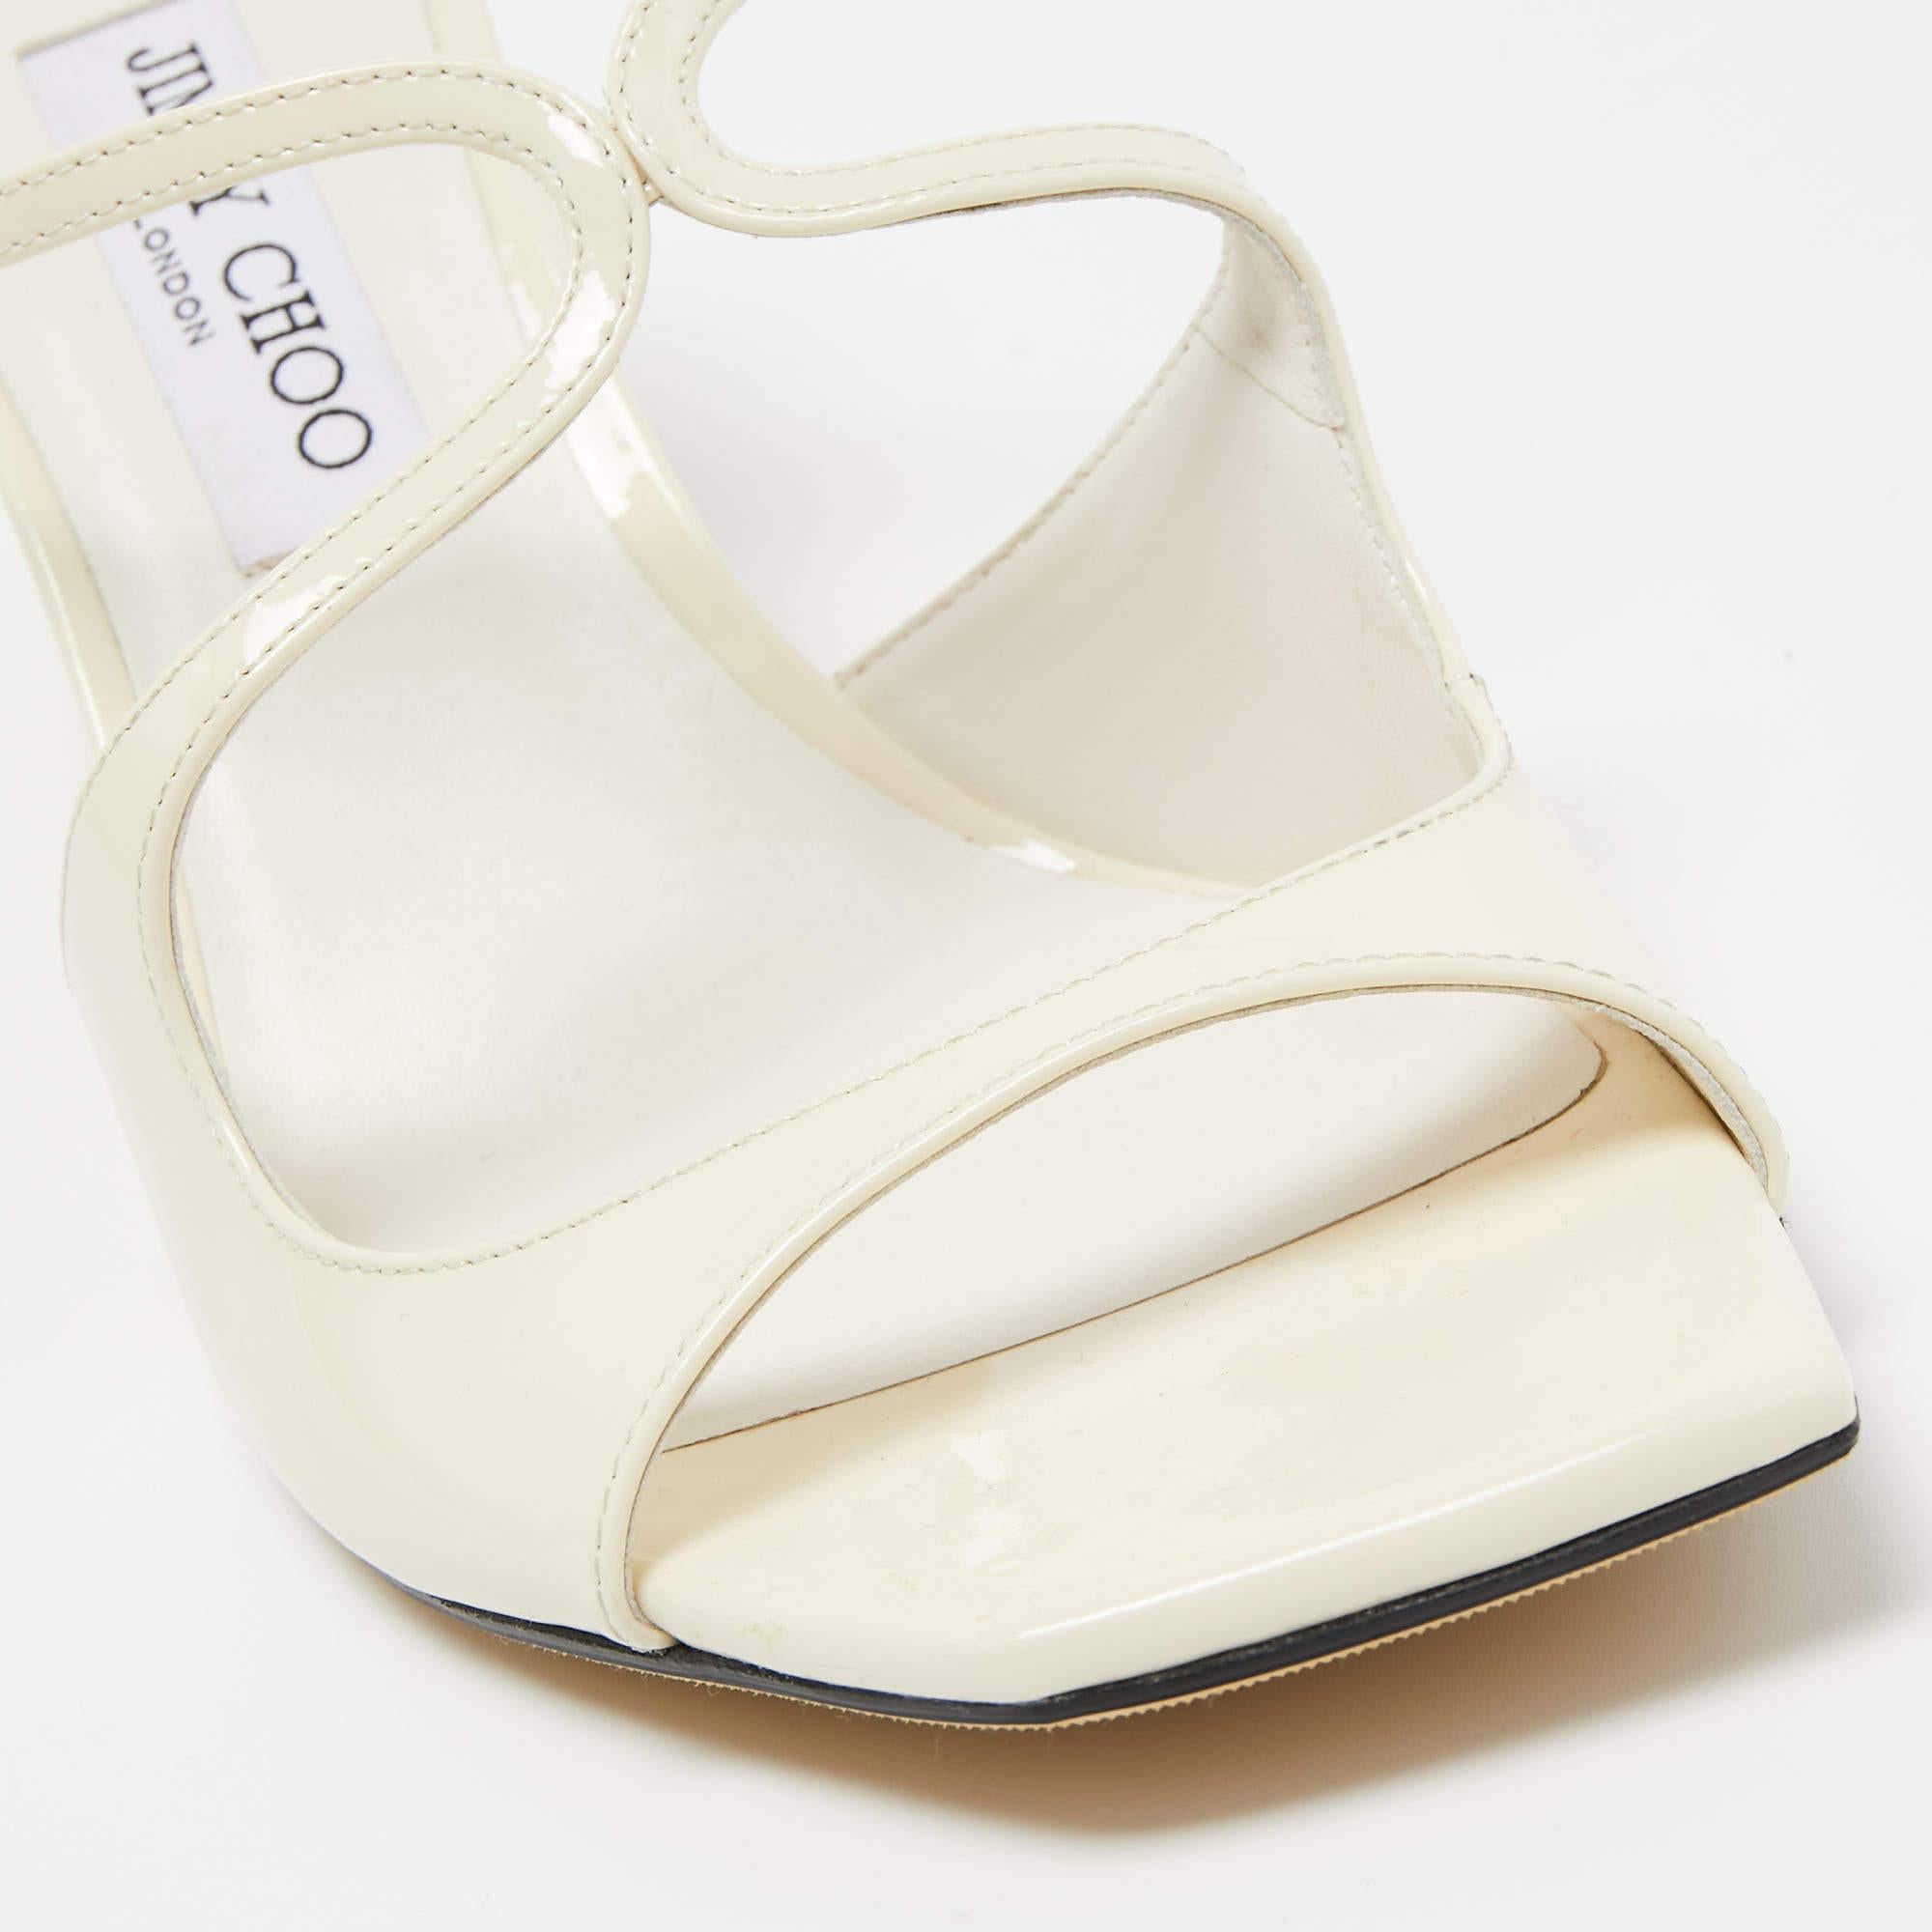 Jimmy Choo Off White Patent Leather Anise Sandals Size 42 3